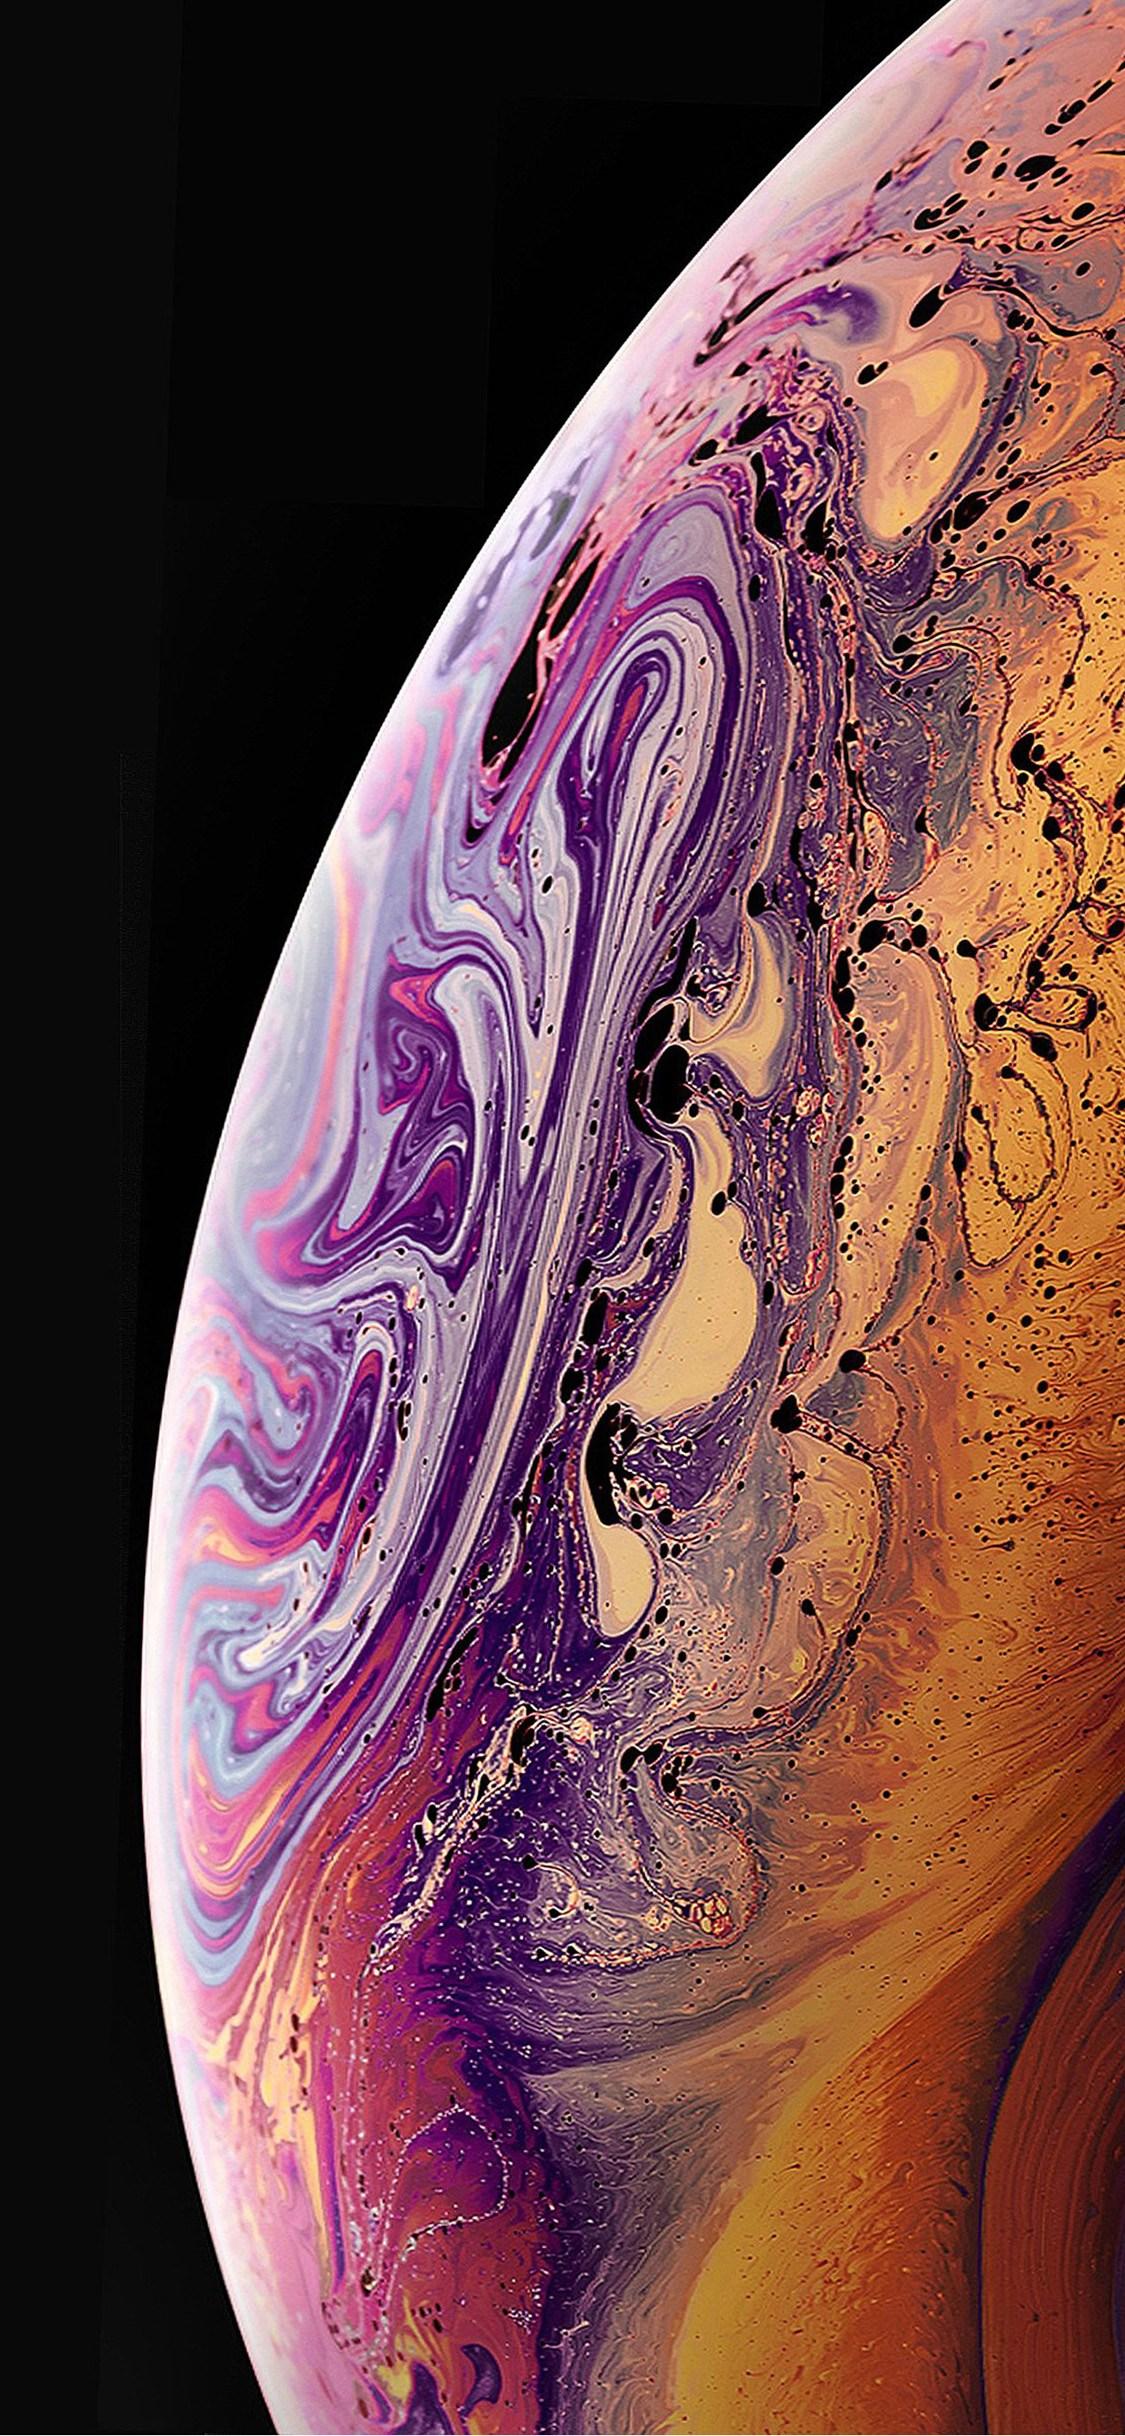 iPhone XS Stock Hd Wallpapers - Wallpaper Cave